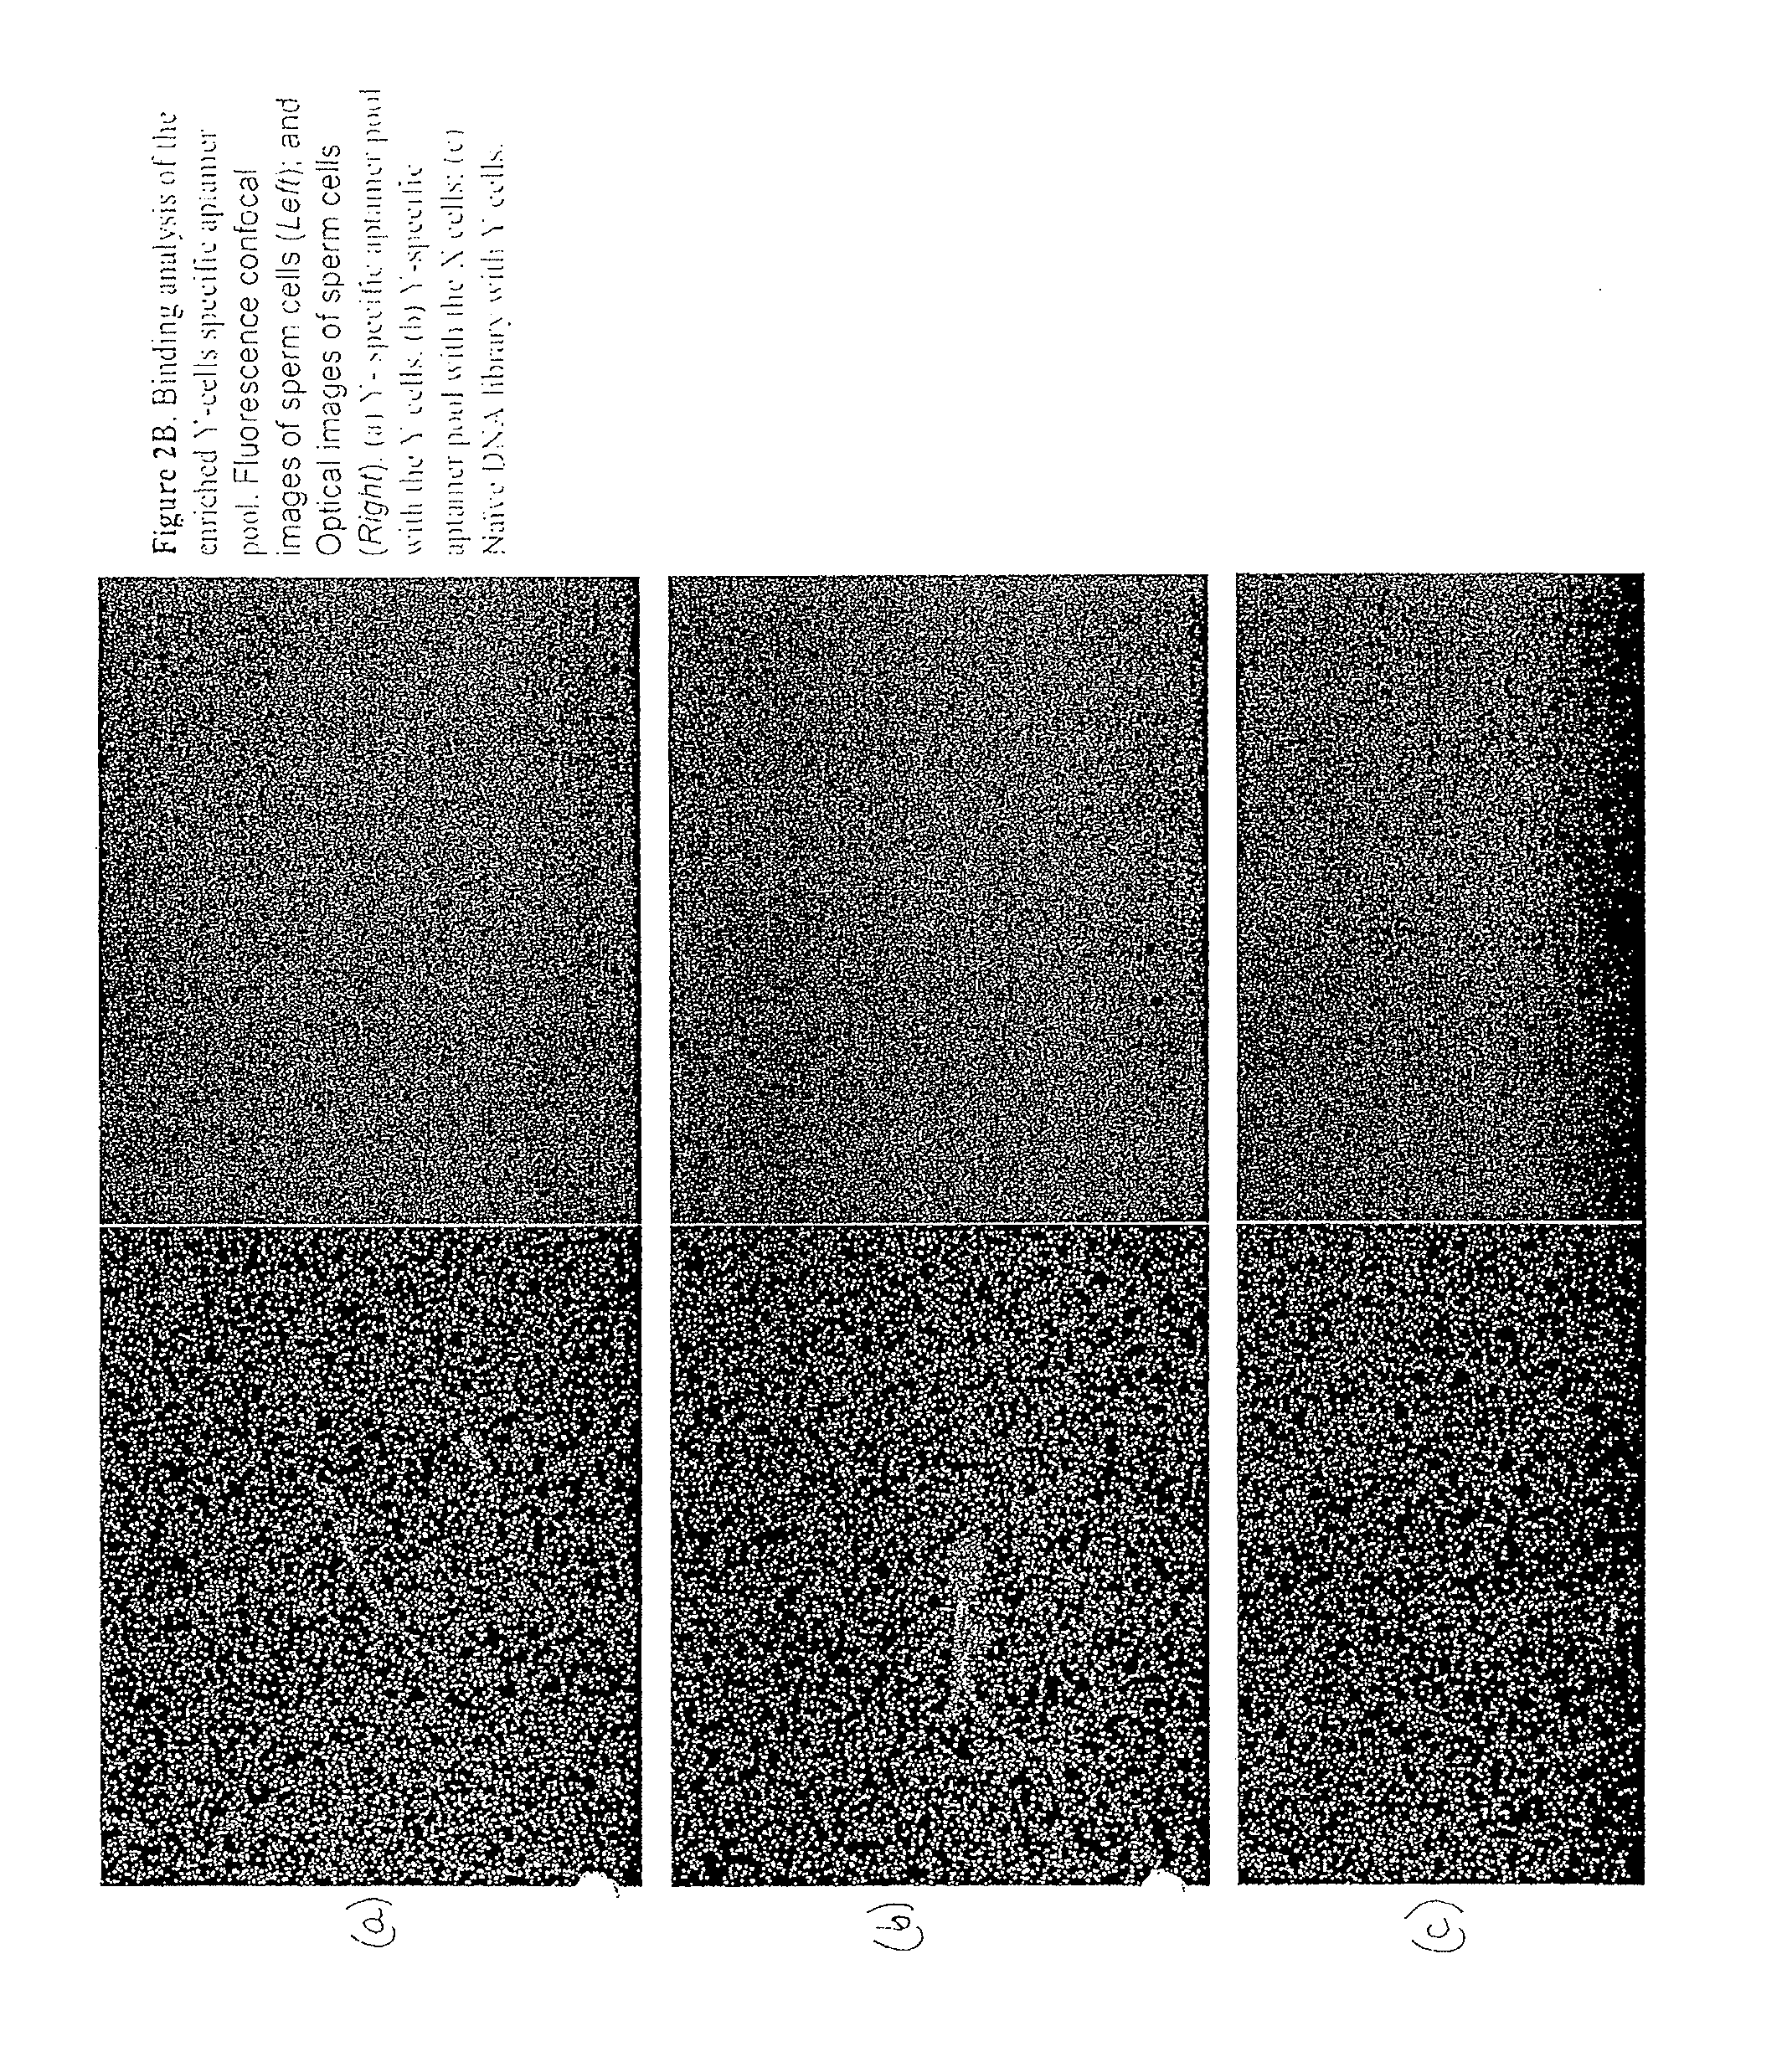 Sperm cell separation methods and compositions containing sperm cell targeting ligands for use therein